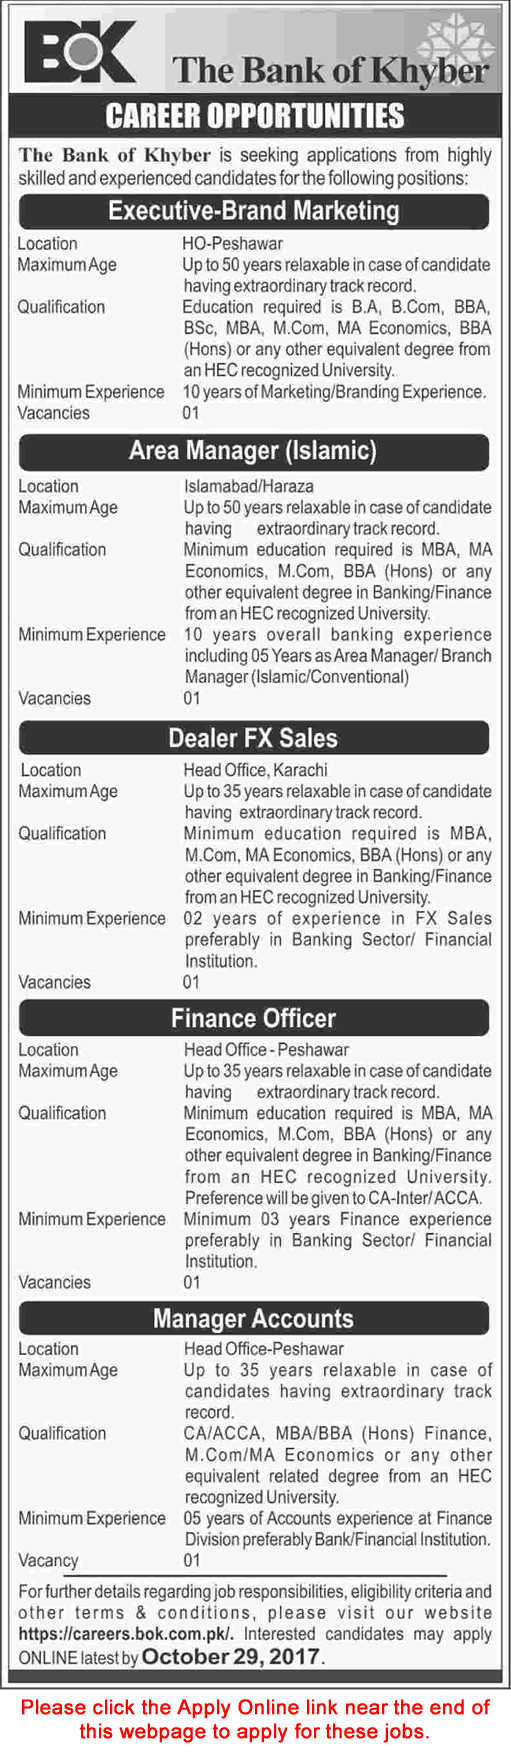 Bank of Khyber Jobs October 2017 Apply Online Accounts Manager, Finance Officer & Others Latest